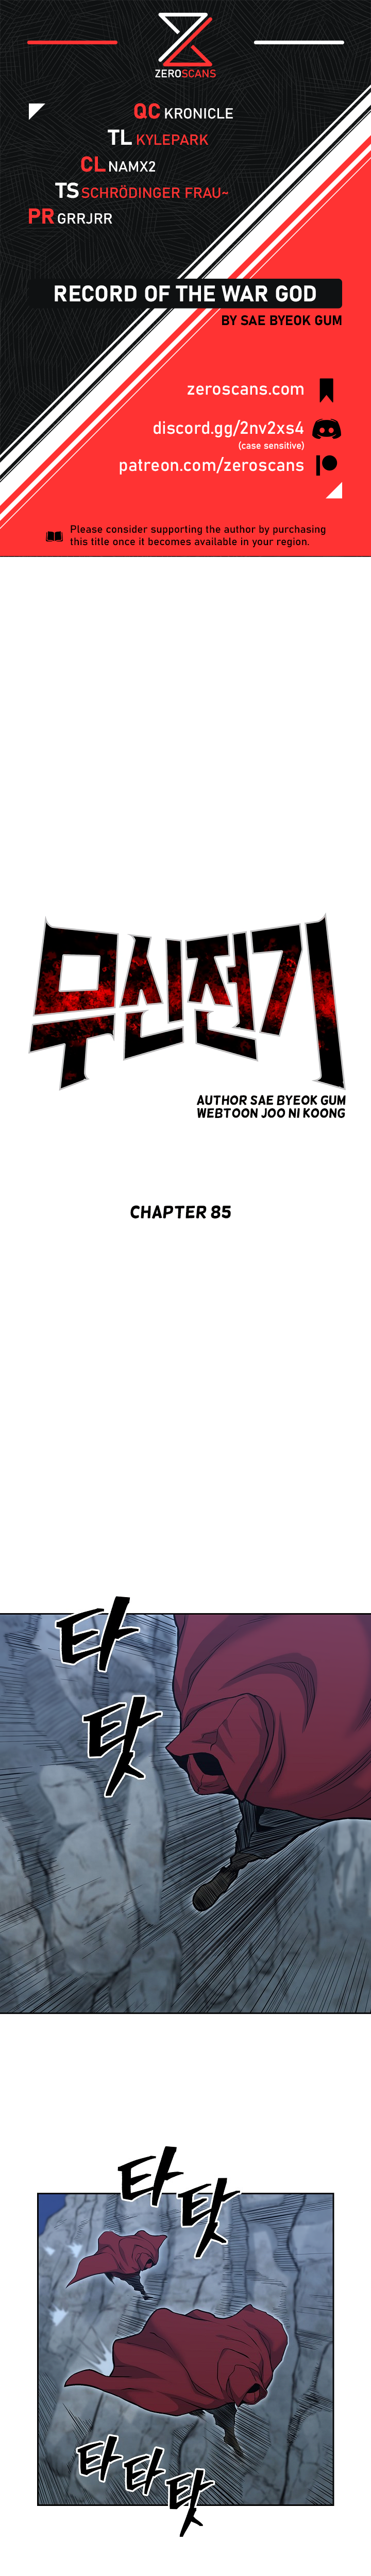 Record of the War God - Chapter 5961 - Image 1